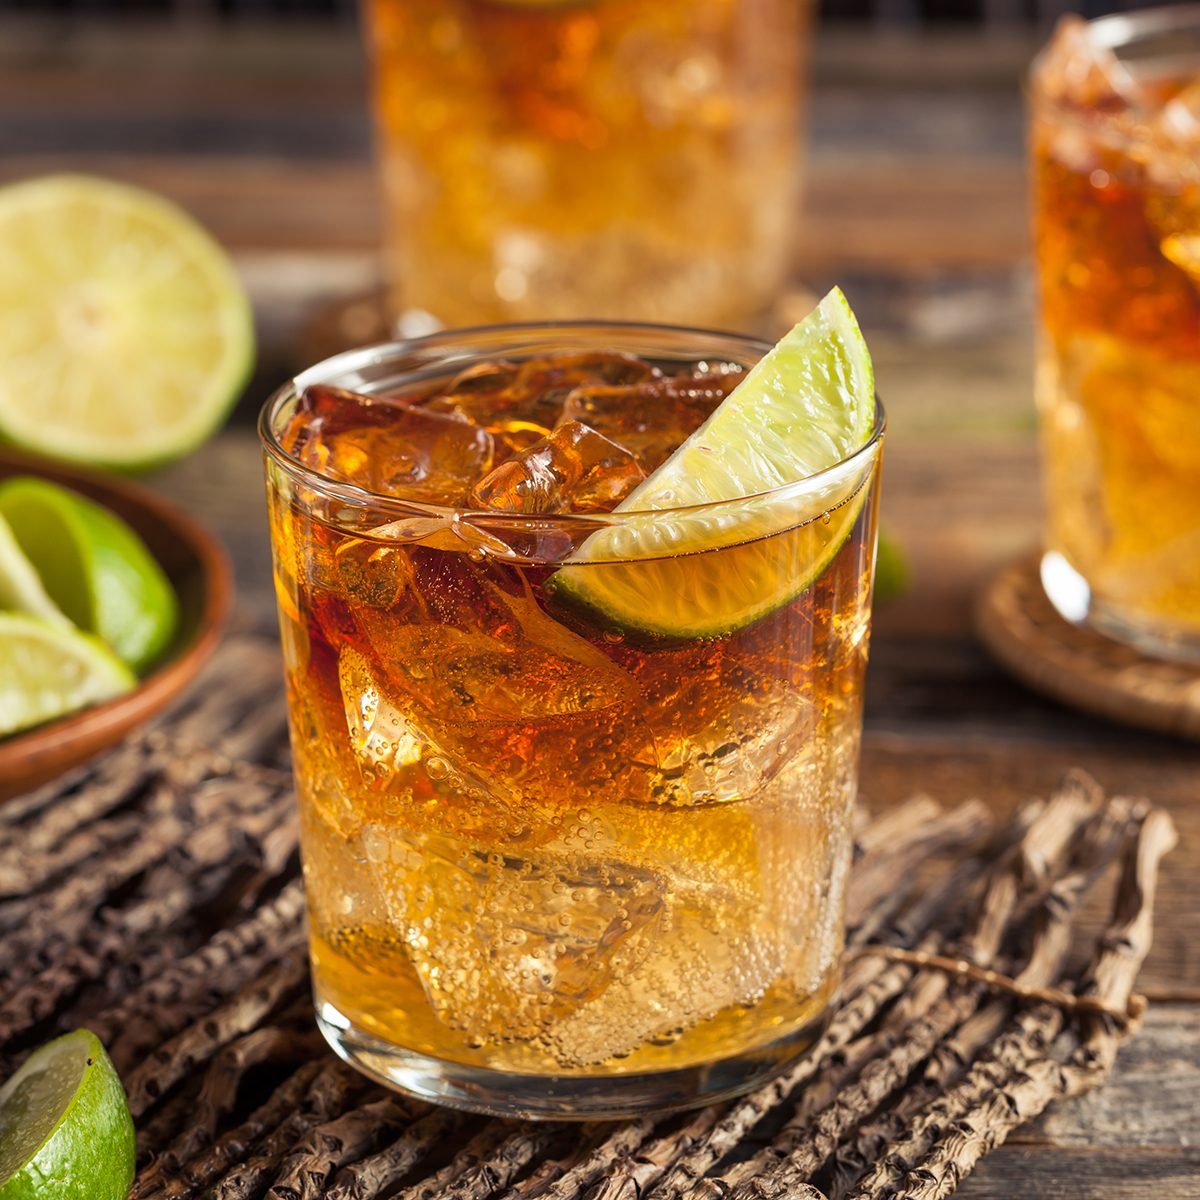 15 Classic Rum Drinks That You Should Know | Taste of Home